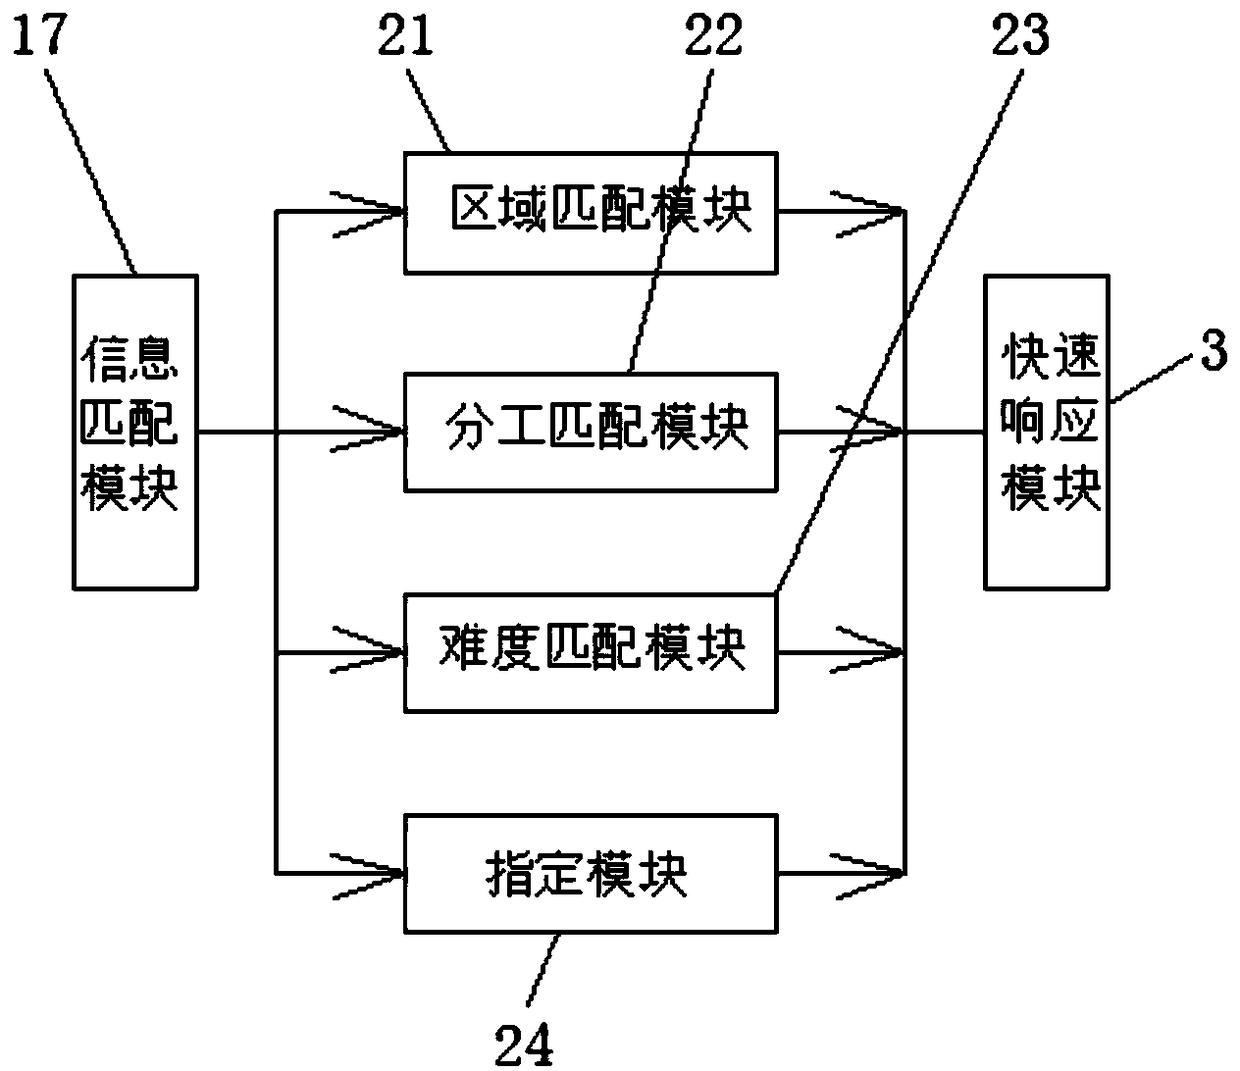 Cloud property staff intelligent matching and distributing system